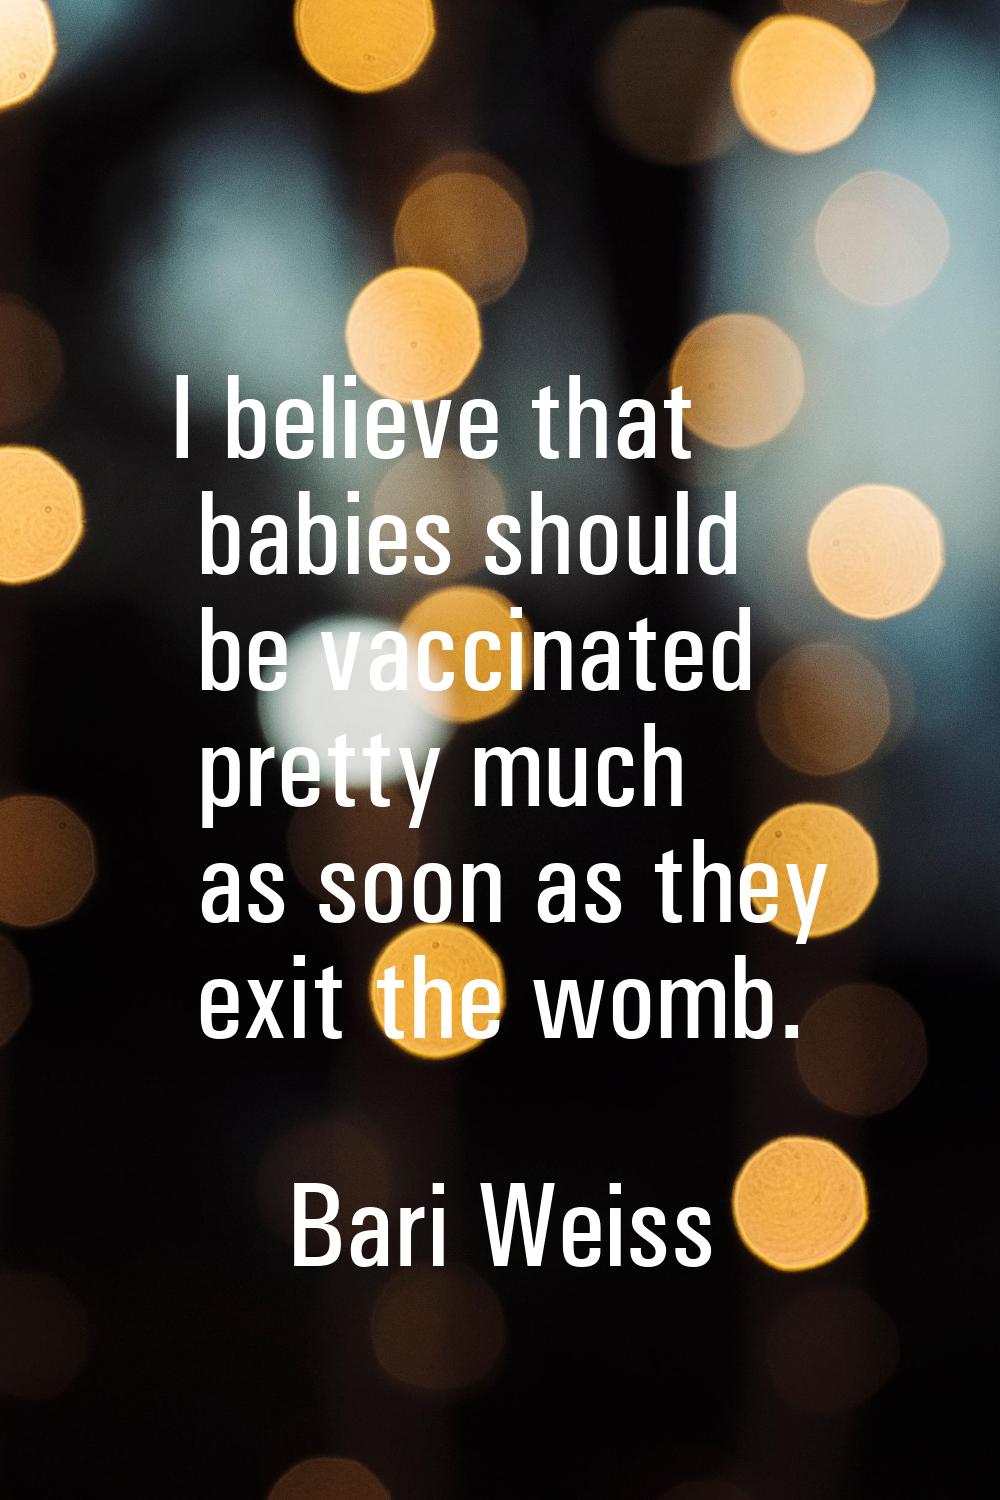 I believe that babies should be vaccinated pretty much as soon as they exit the womb.